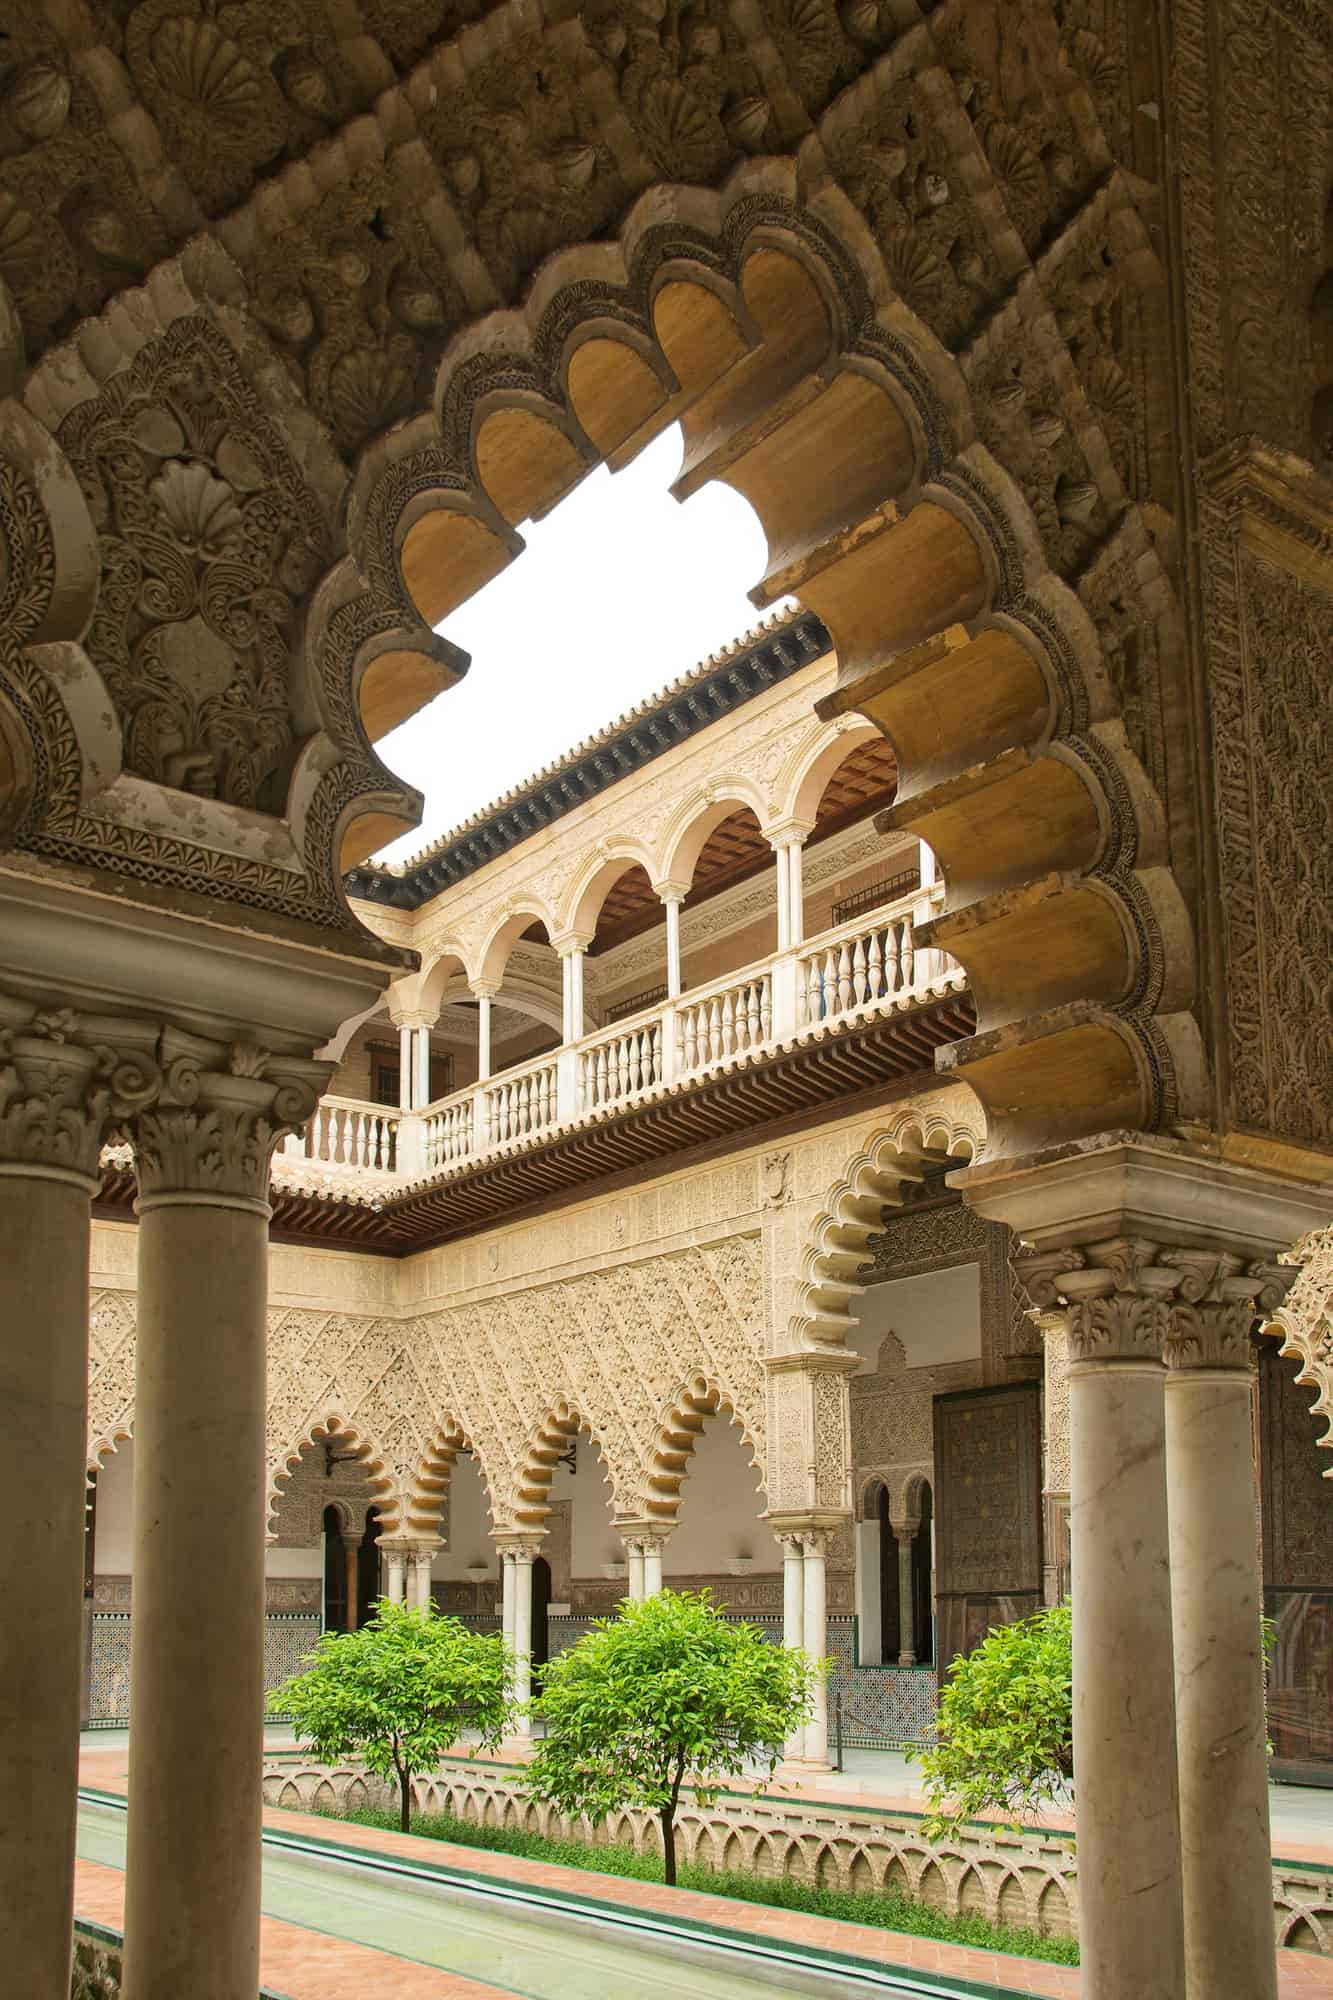 Seville Alcazar Patio de las Doncellas (Courtyard of the Maidens). It is a royal palace in Seville, Spain, built for the Christian king Peter of Castile. Is a UNESCO World Heritage